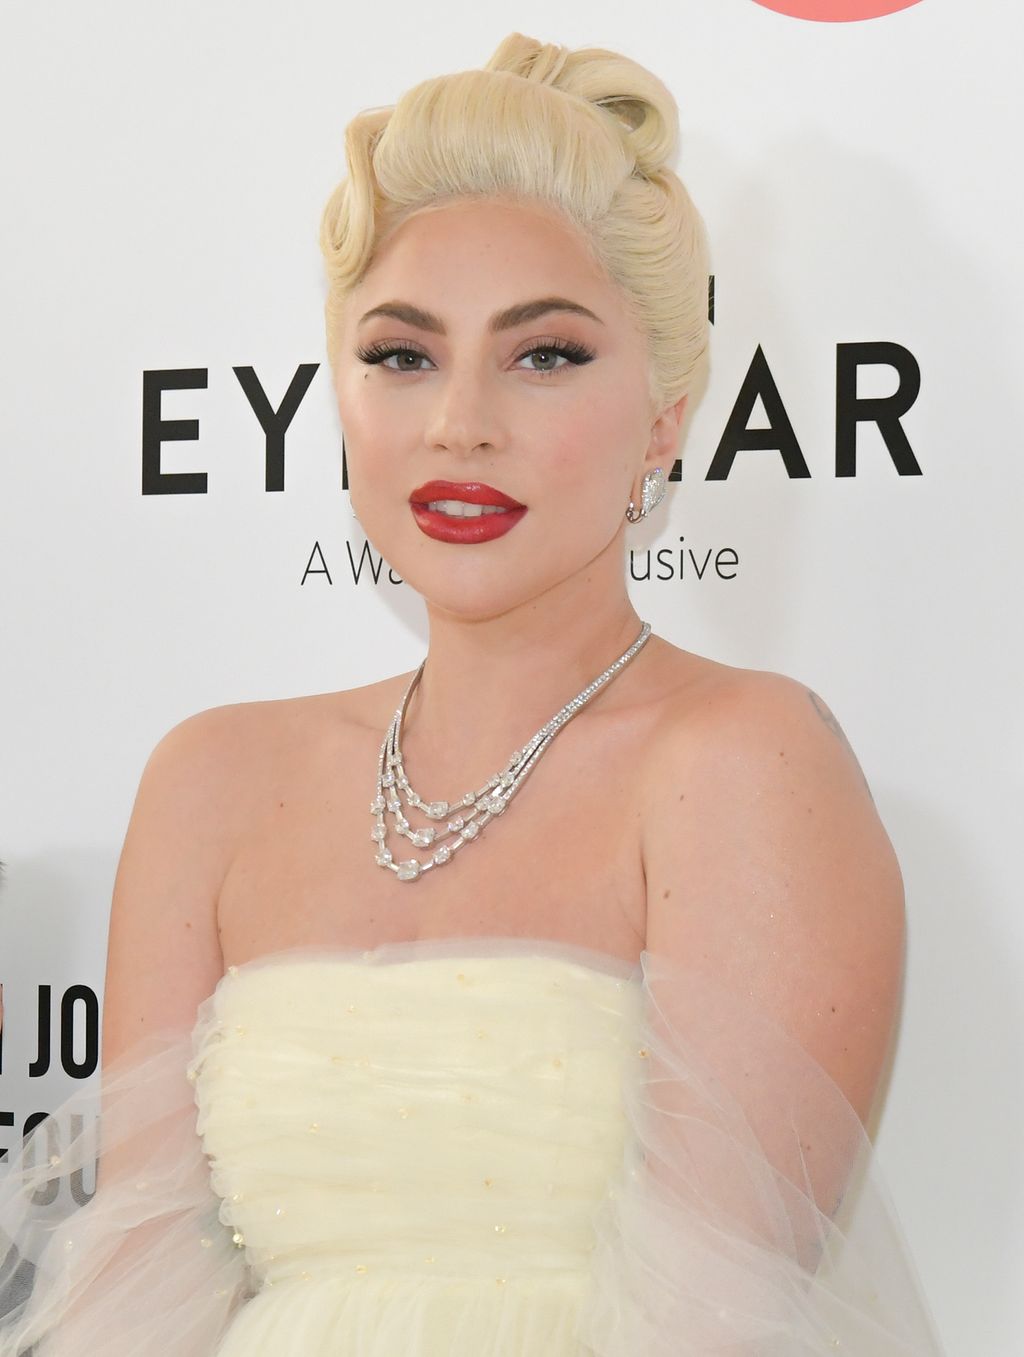 Lady Gaga attends Elton John AIDS Foundation's 30th Annual Academy Awards Viewing Party on March 27, 2022 in West Hollywood, California.